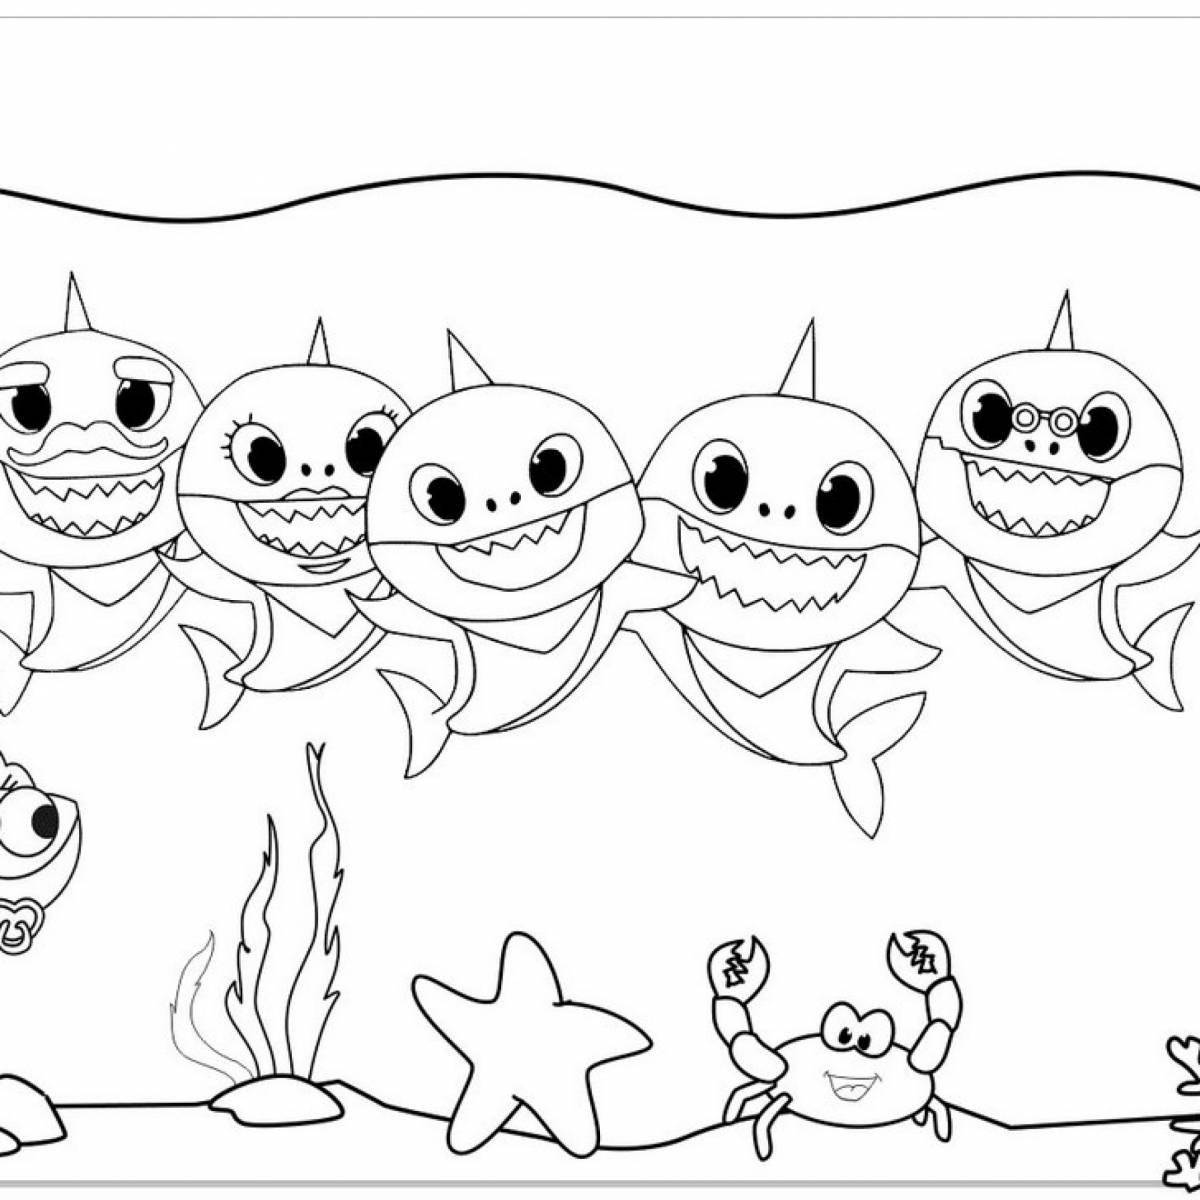 Coloring page happy shark family